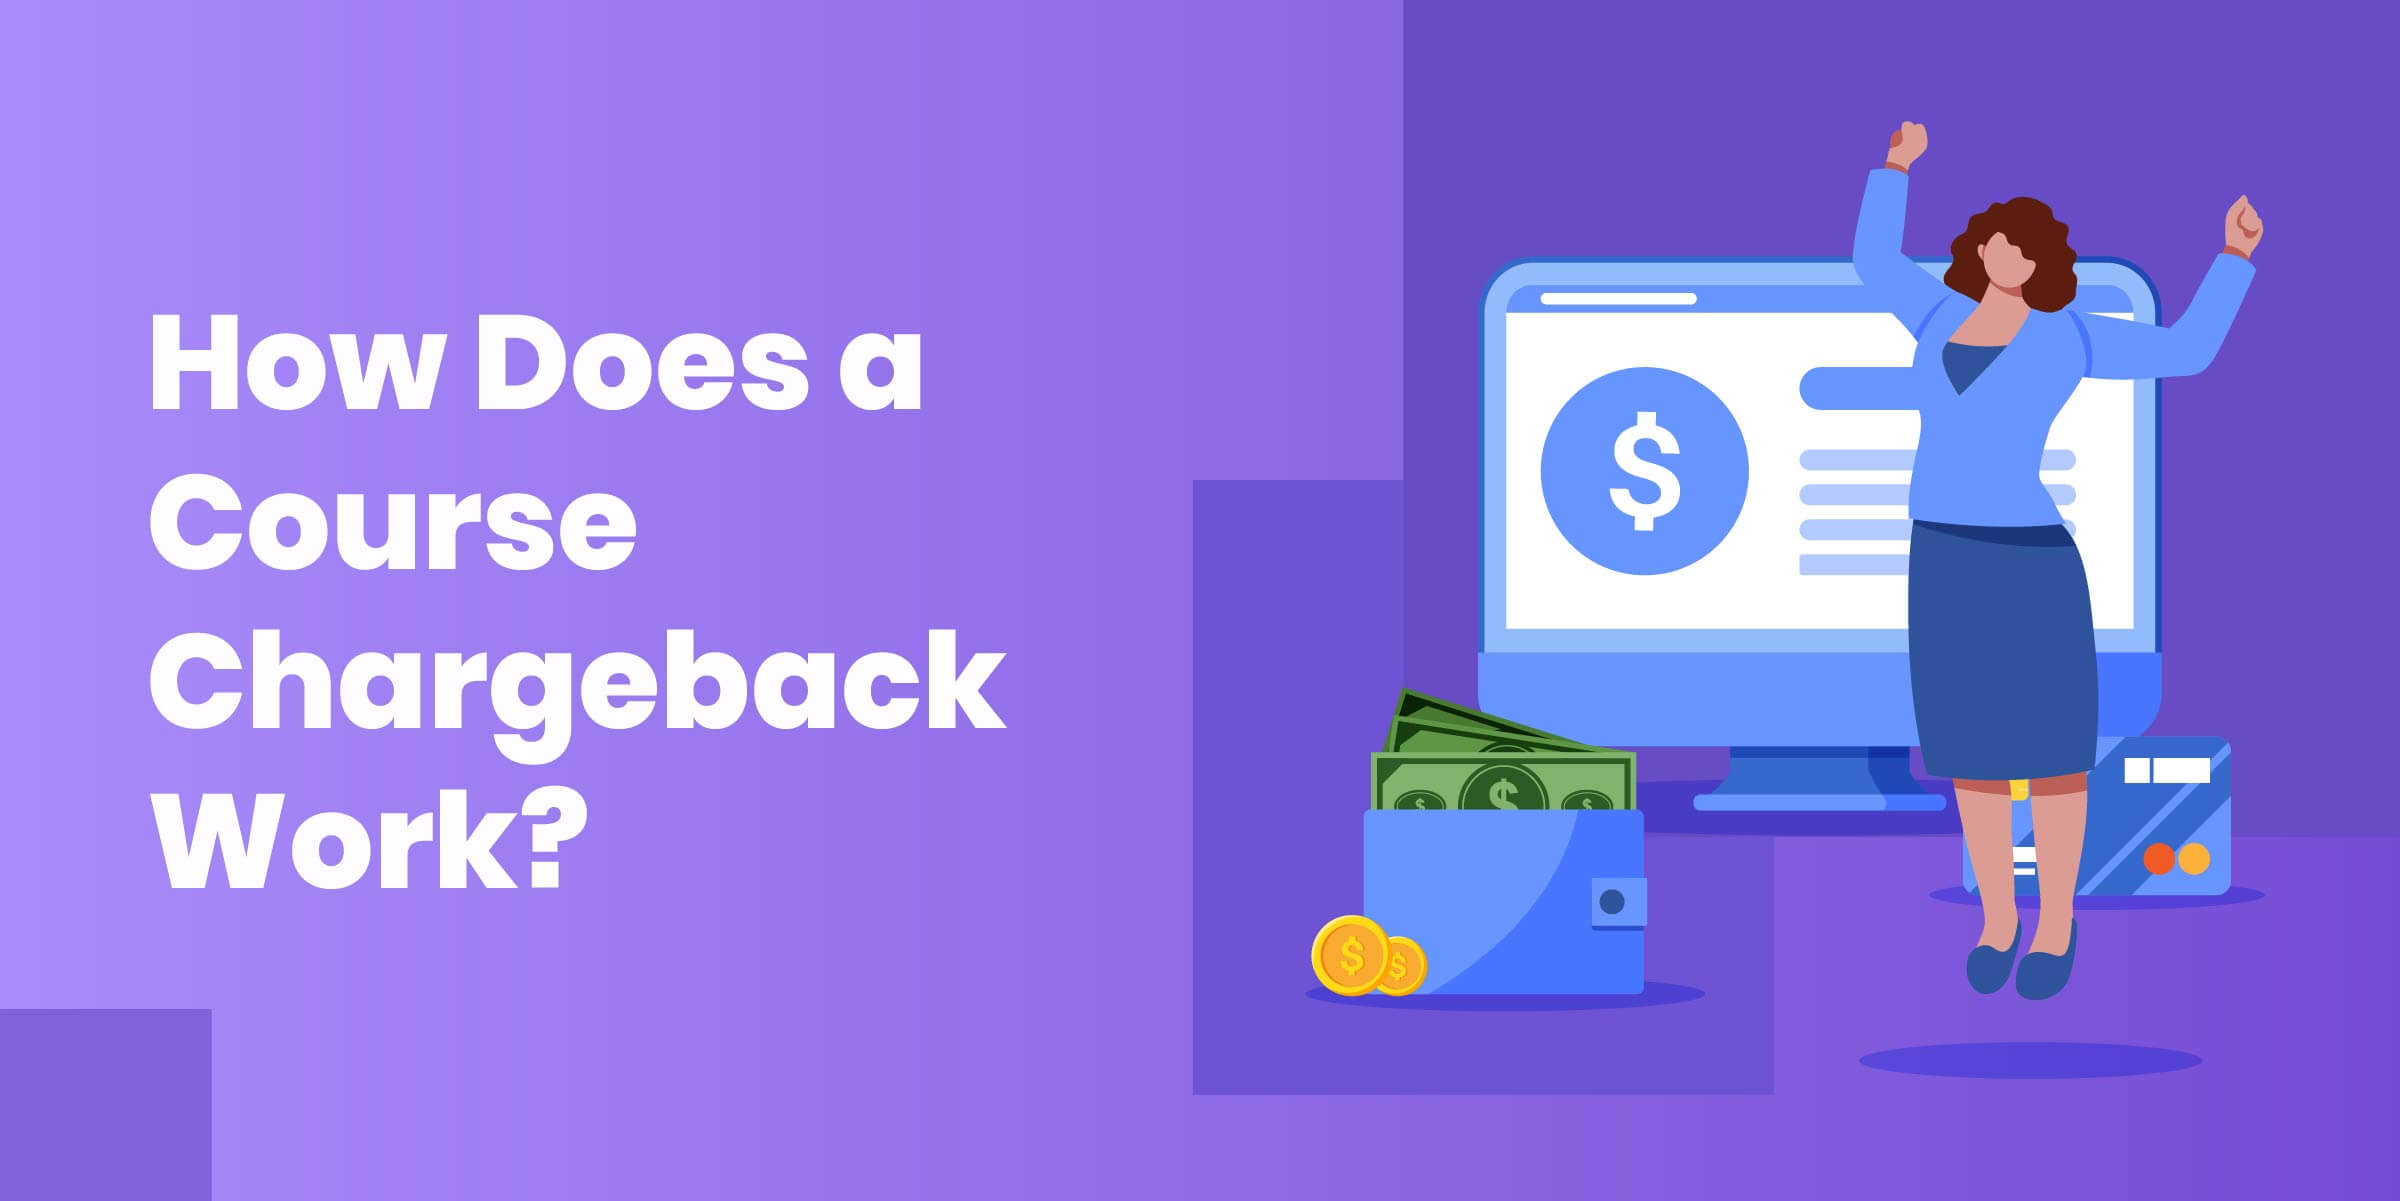 How Does Course Chargeback Work